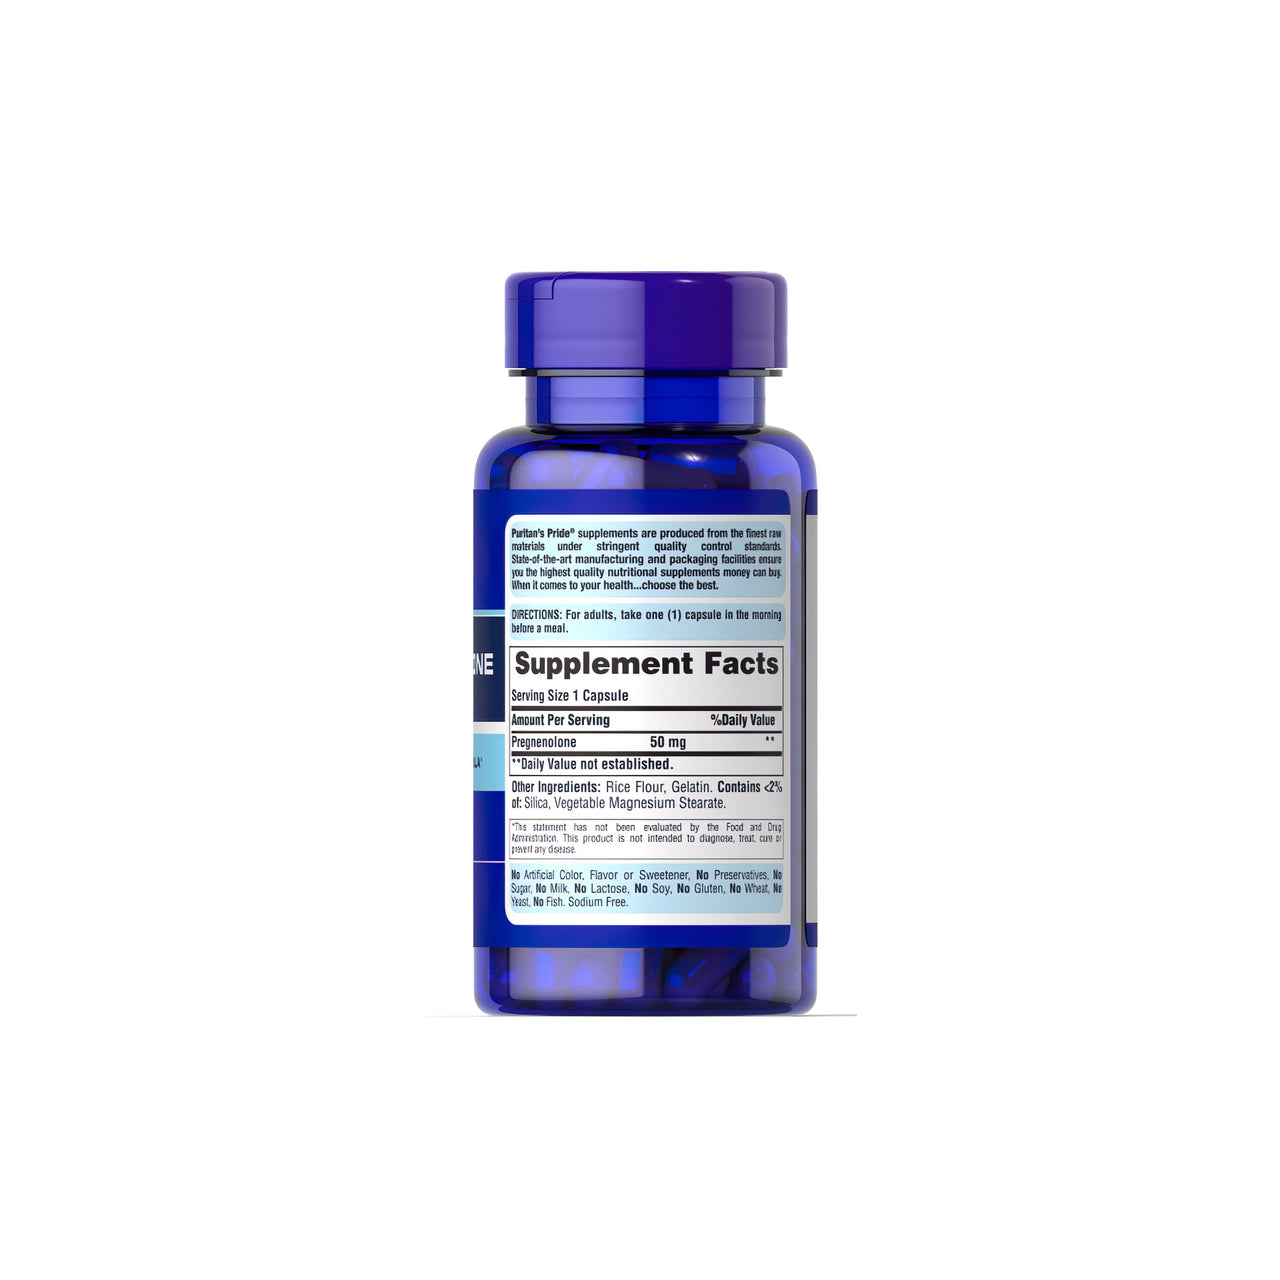 Pregnenolone 50 mg 90 Rapid Release Capsules - supplement facts